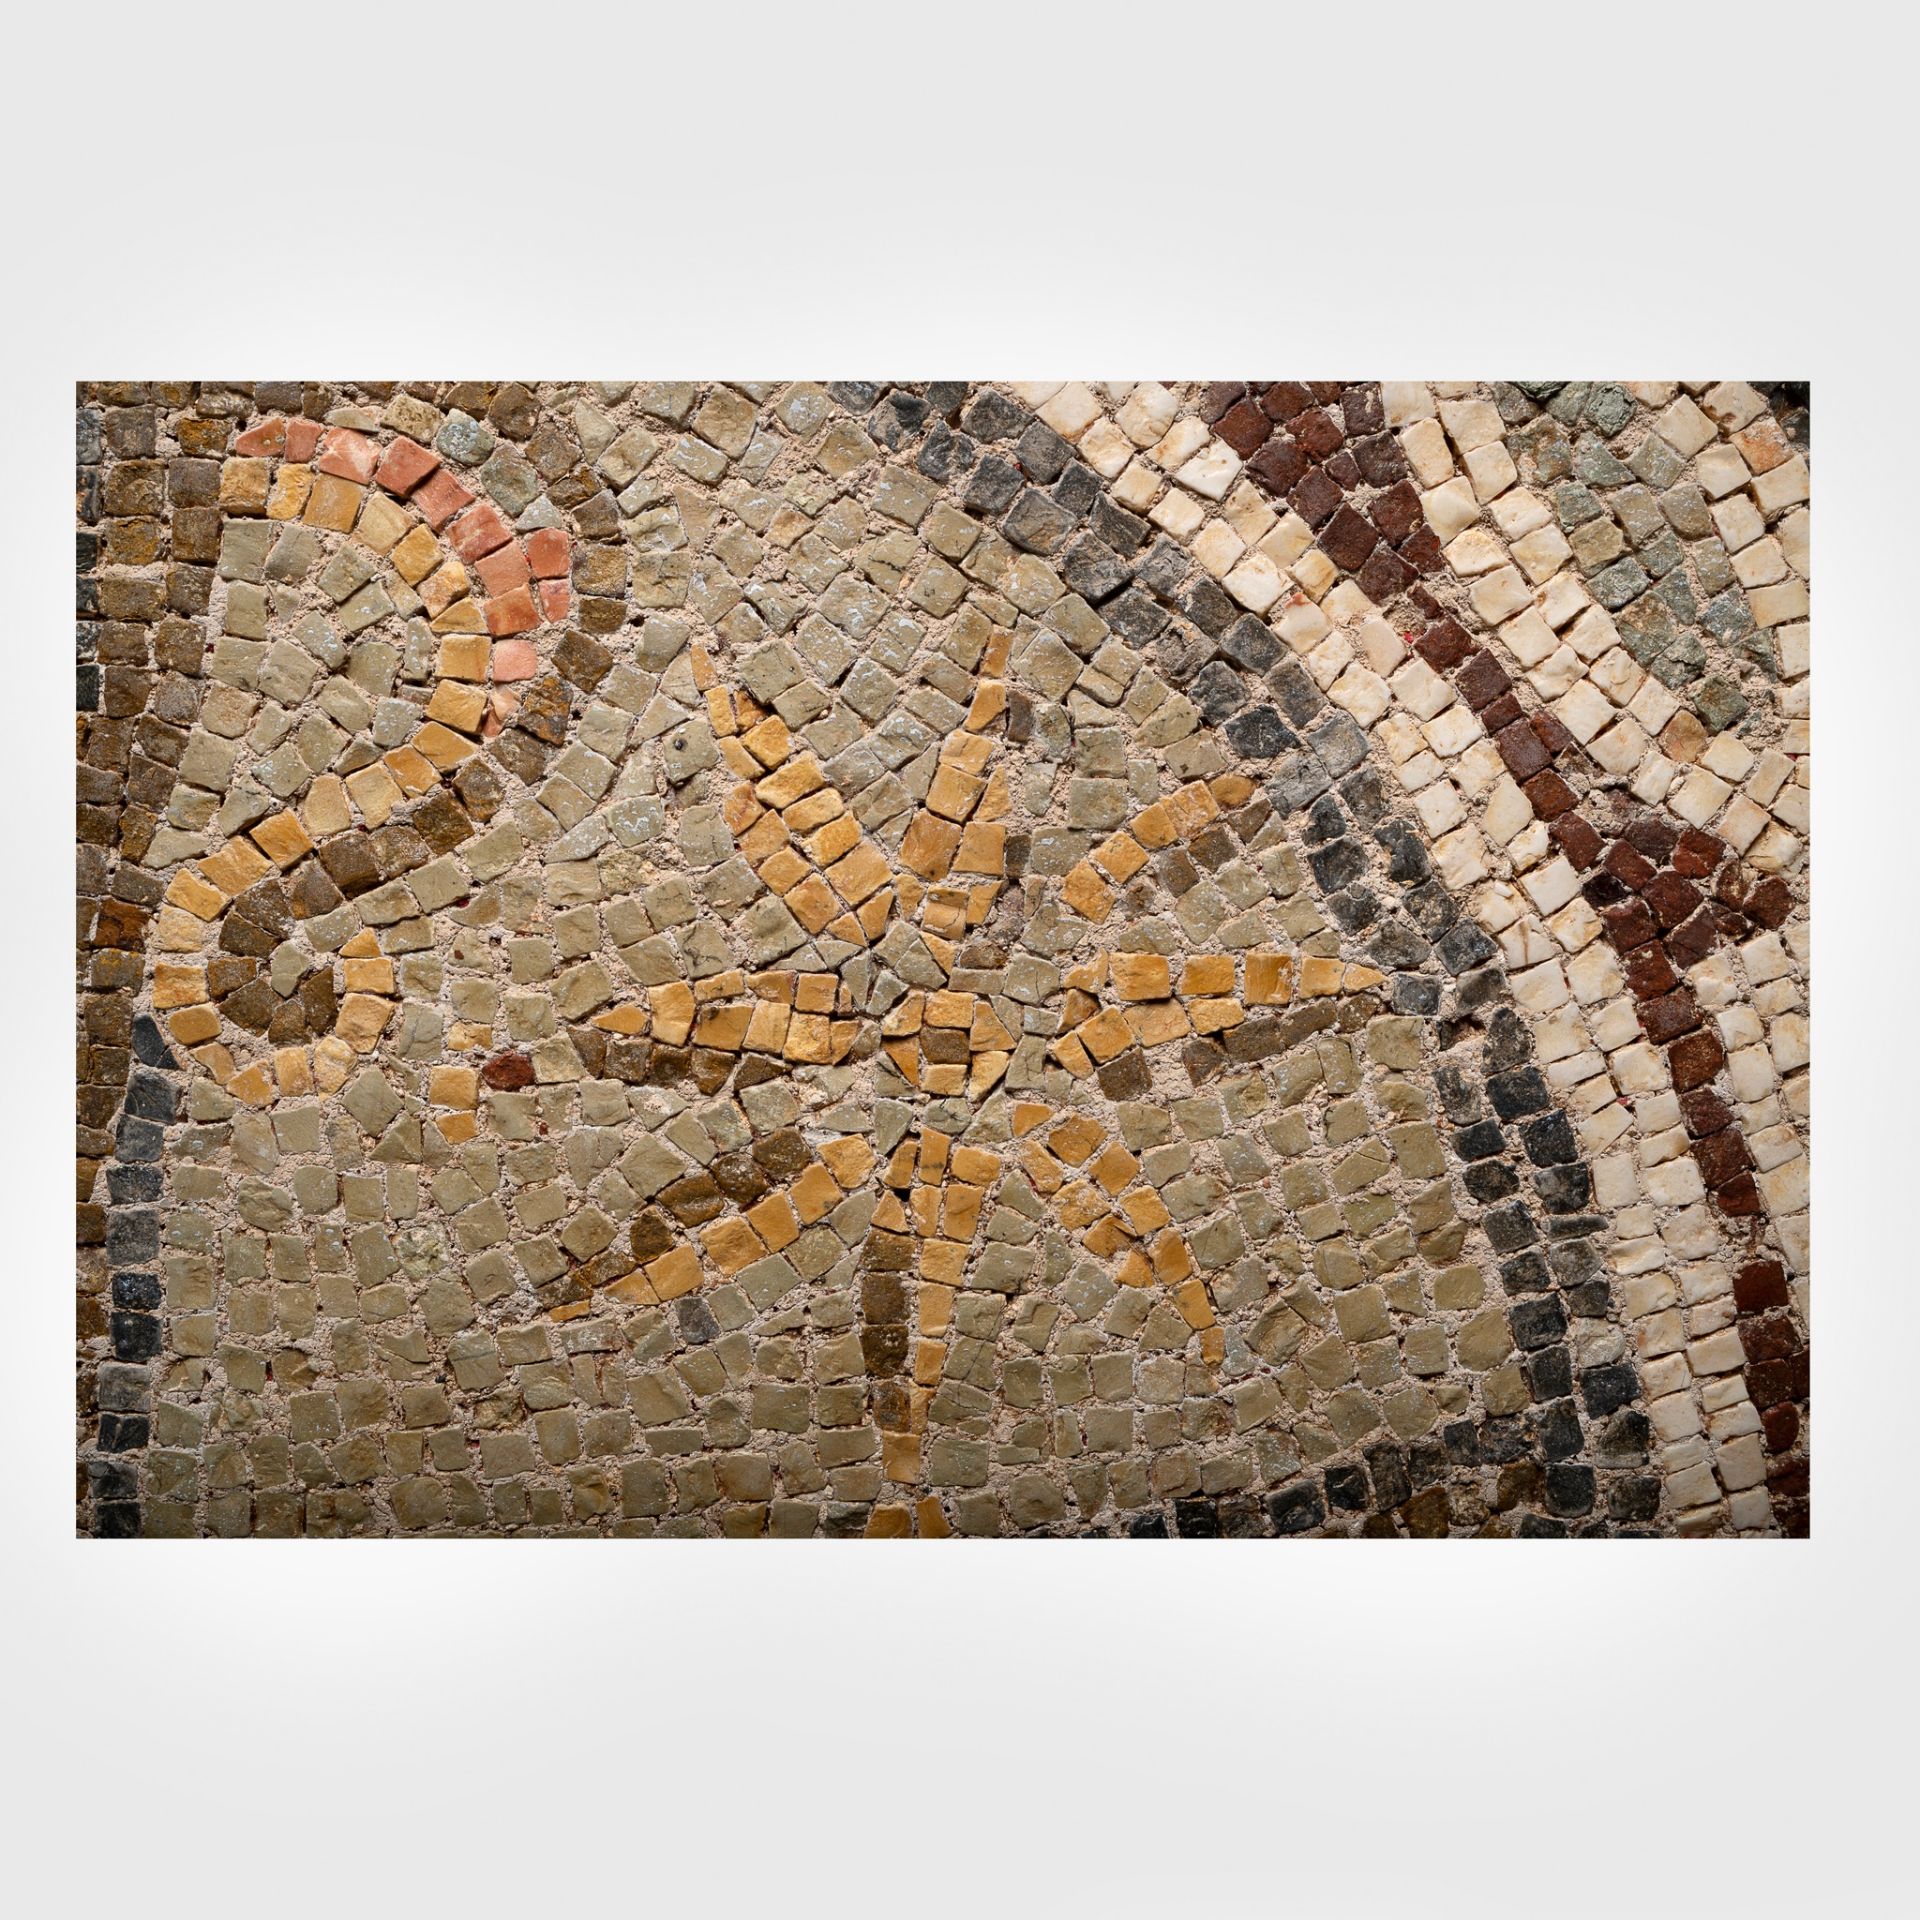 ROMAN CHI RHO MOSAIC EUROPE / NEAR EAST, LATE 4TH CENTURY A.D. - Image 4 of 6